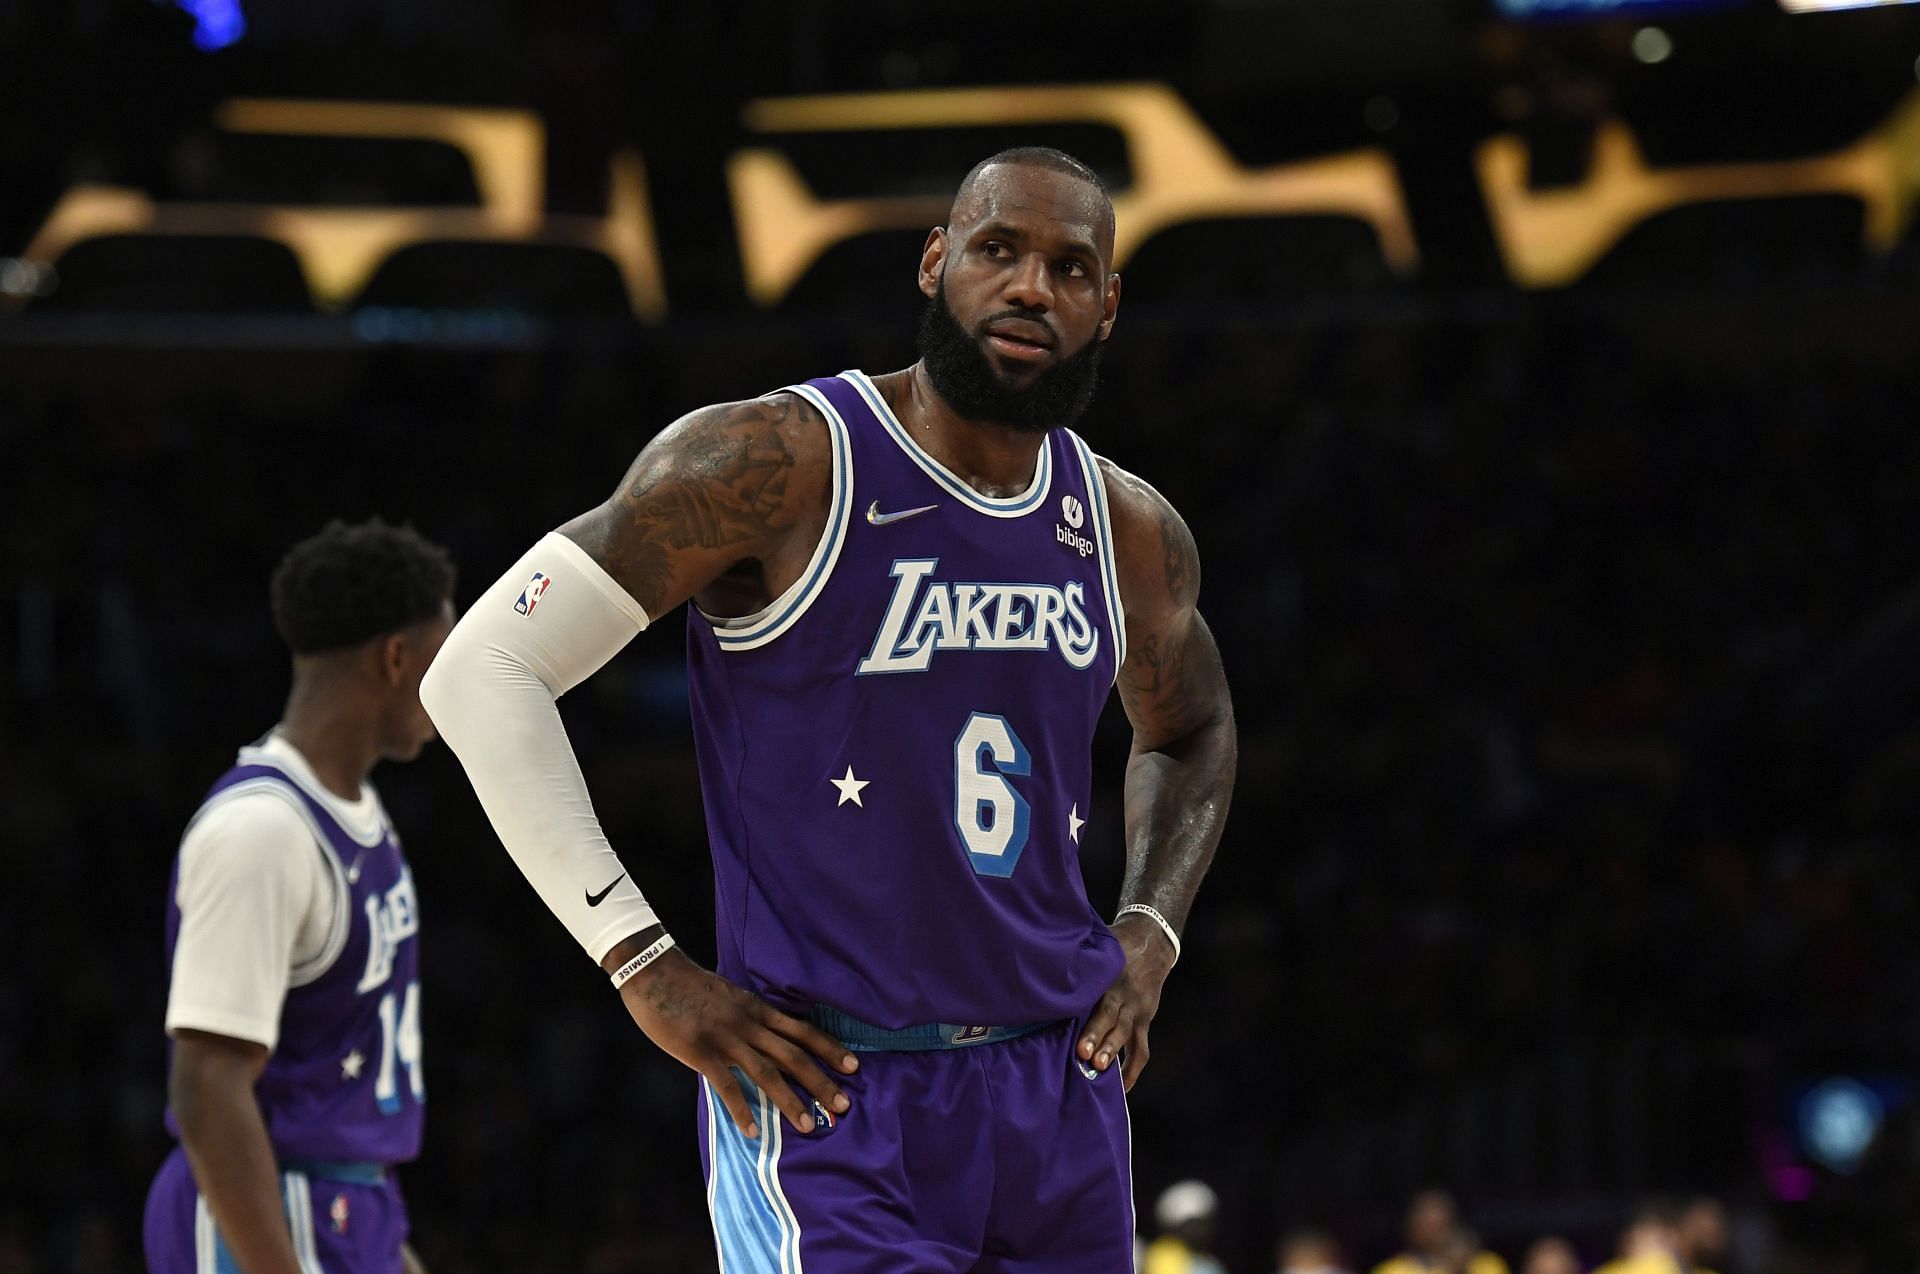 LeBron James agrees to a $97.1M contract extension with the Lakers